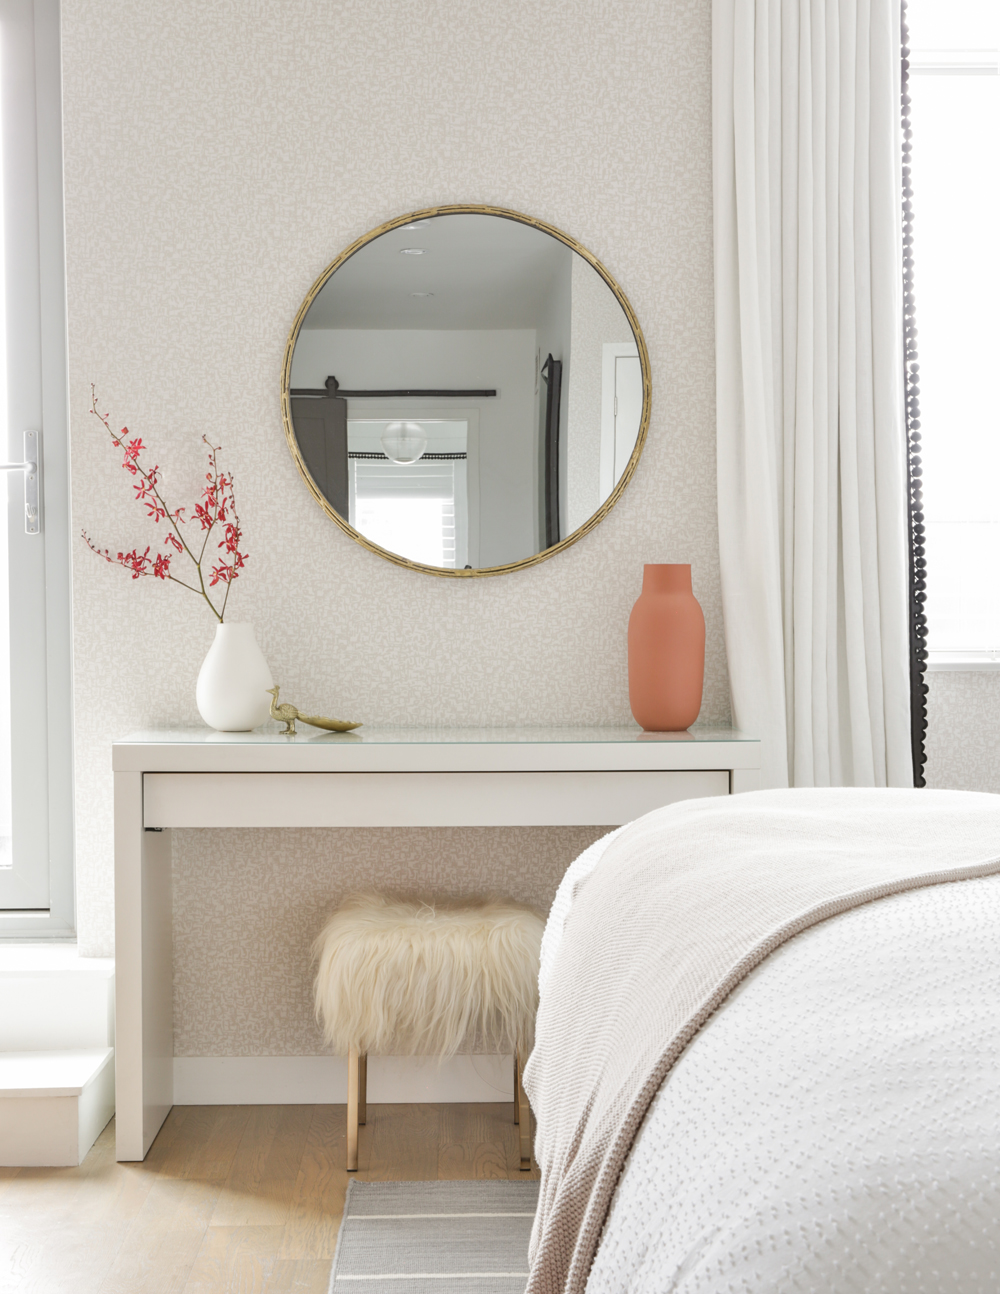 A circular mirror above a small desk in a renovated bedroom with a soothing colour palette